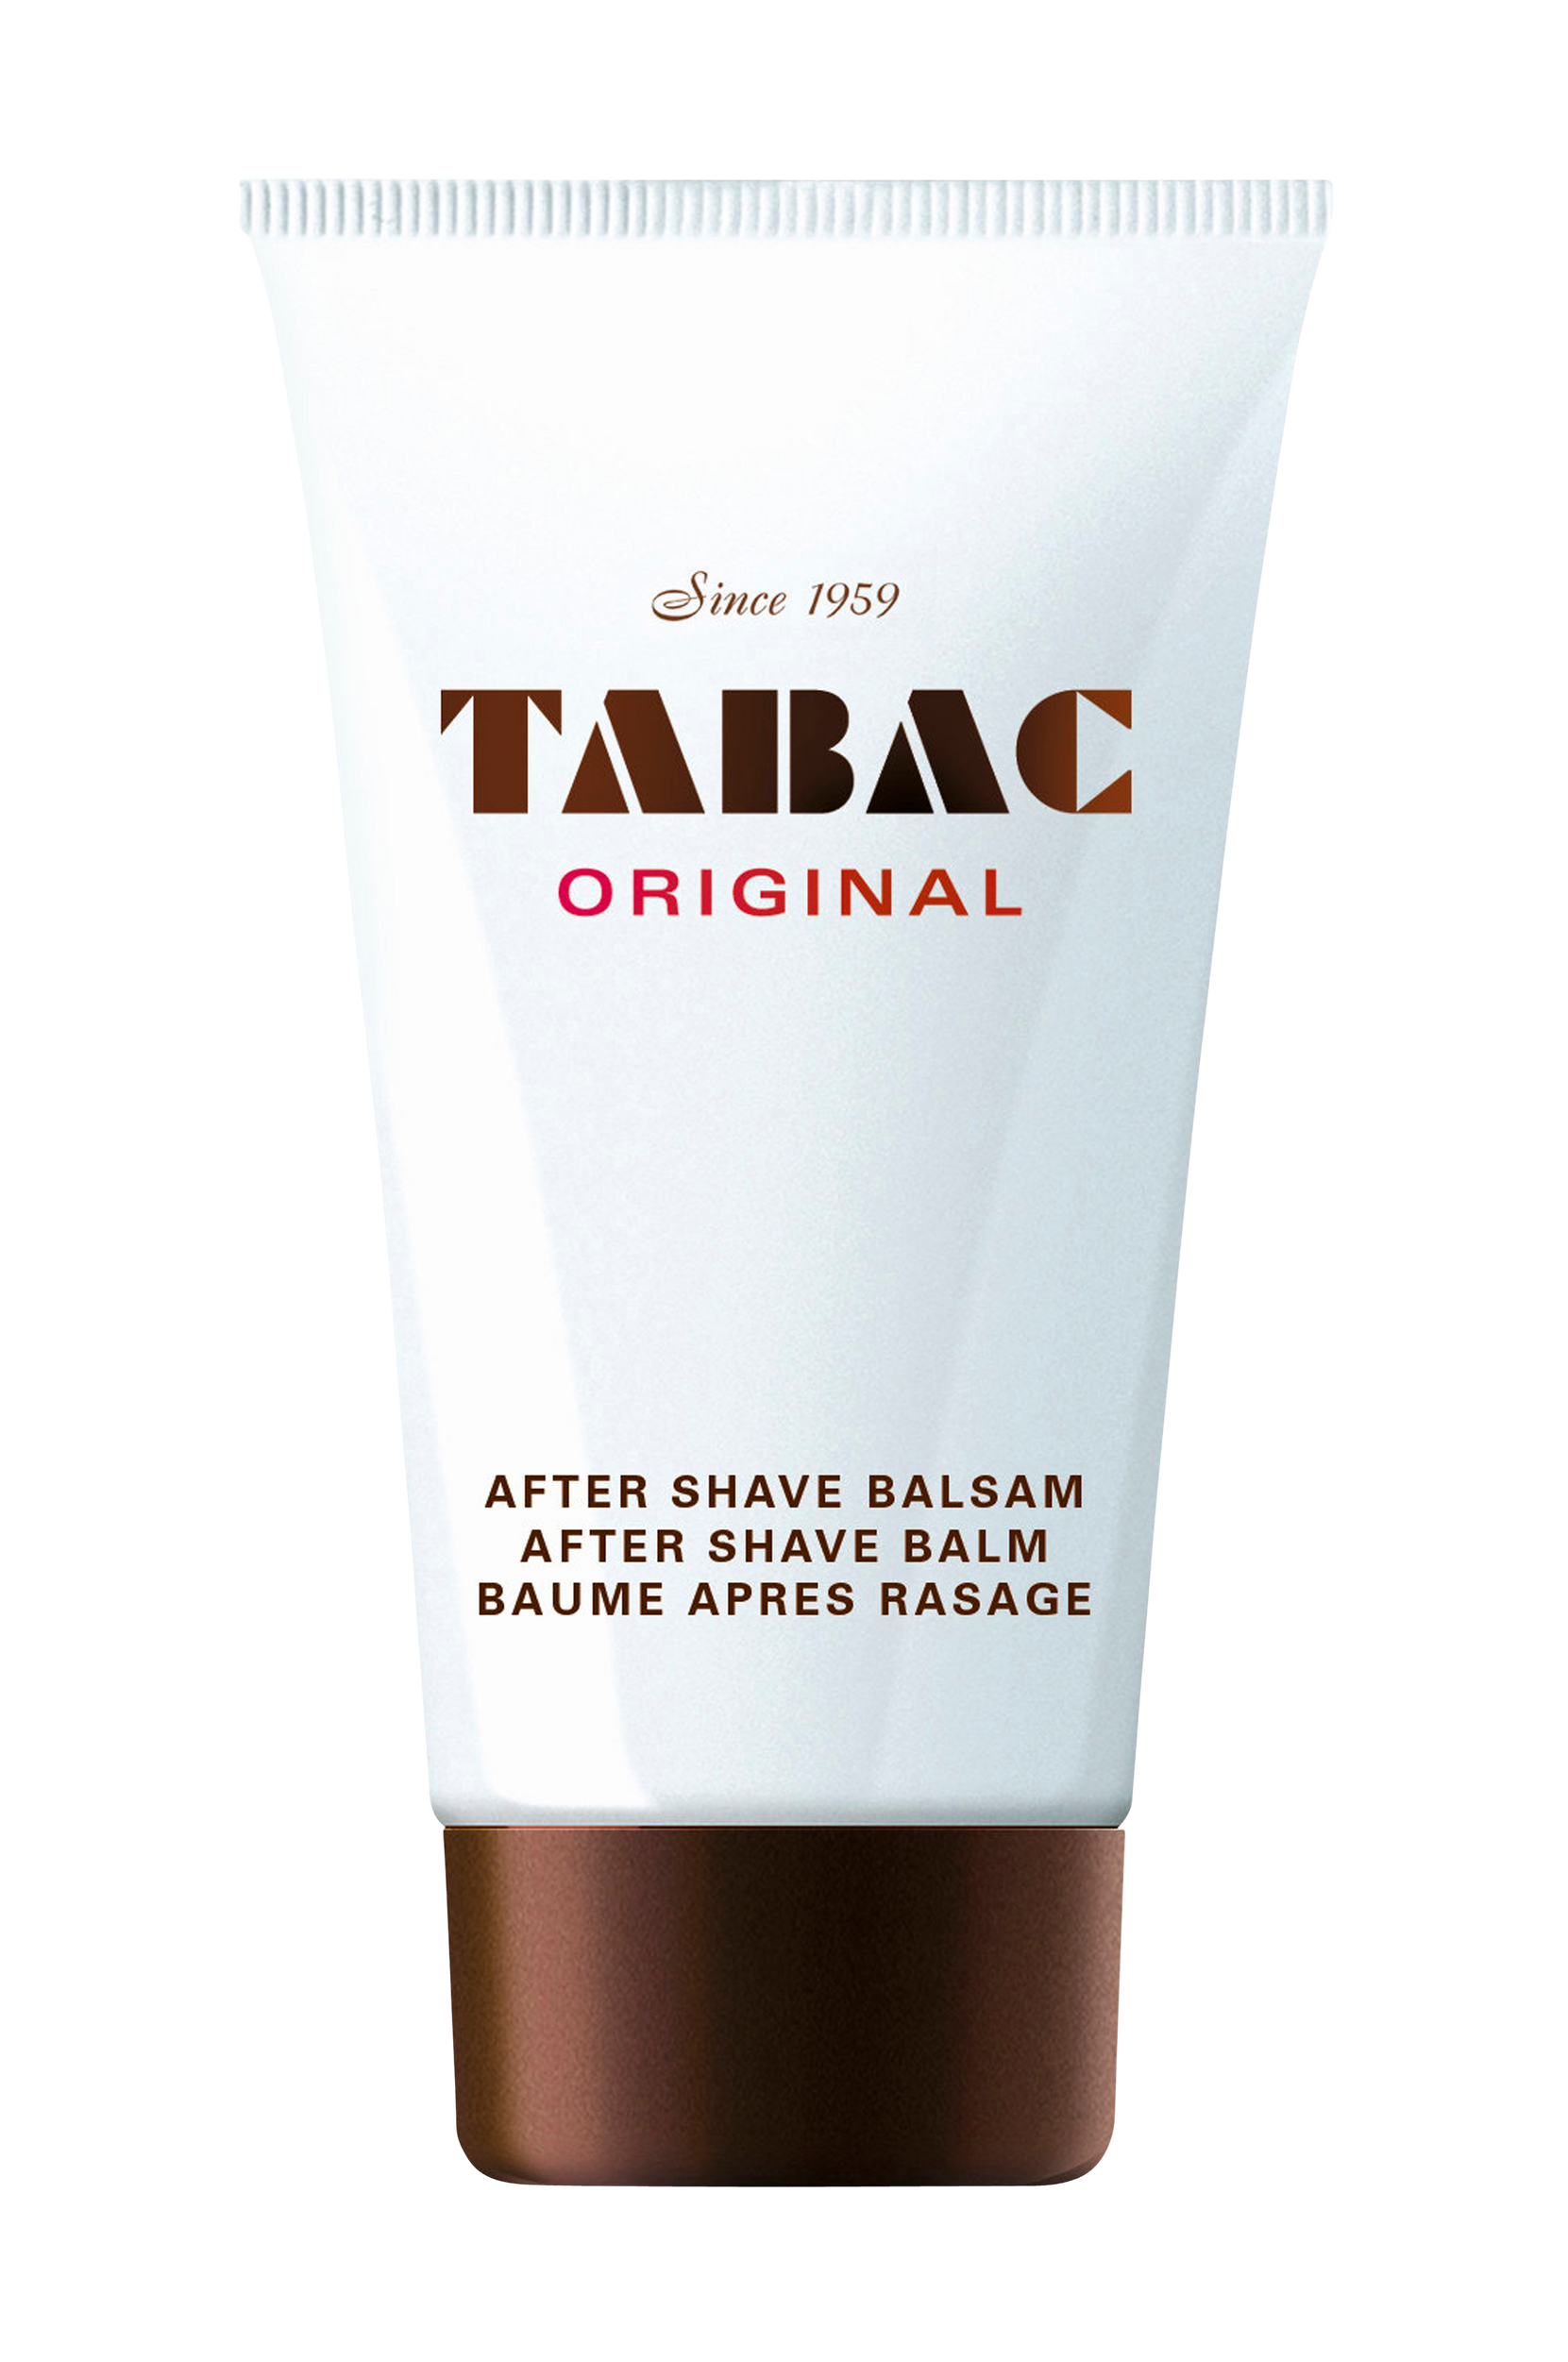 After Shave Balm 75 ml, Tabac